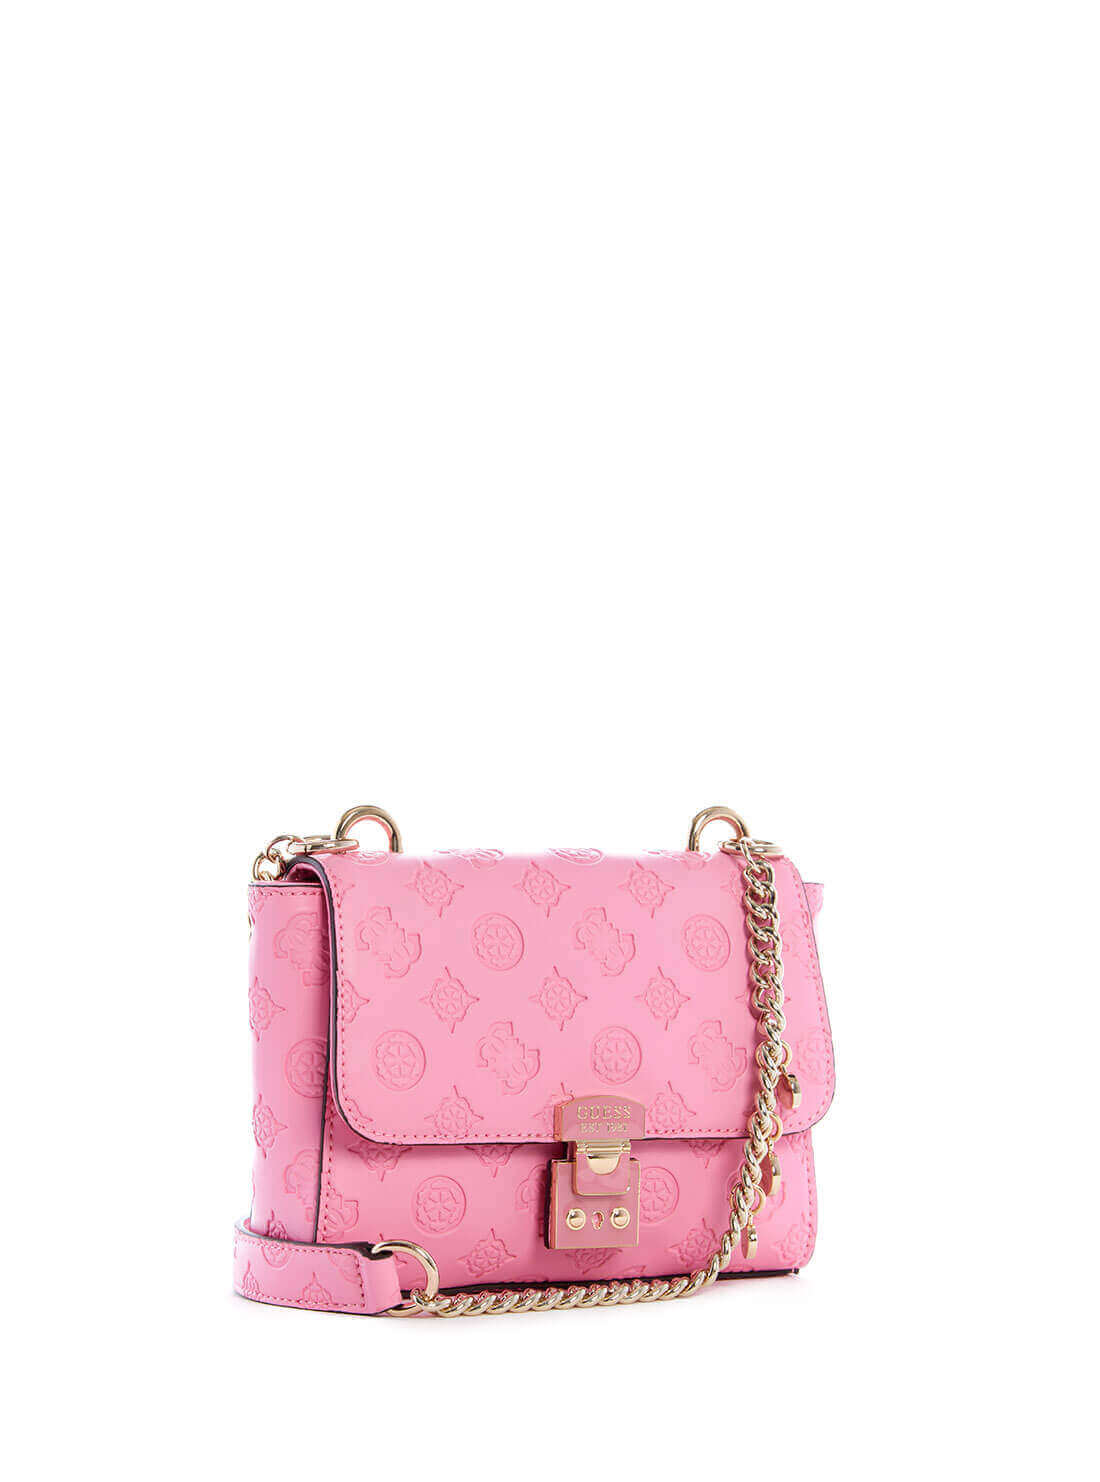 GUESS Womens  Pink Carlson Mini Crossbody Bag PG839878 Front Side View